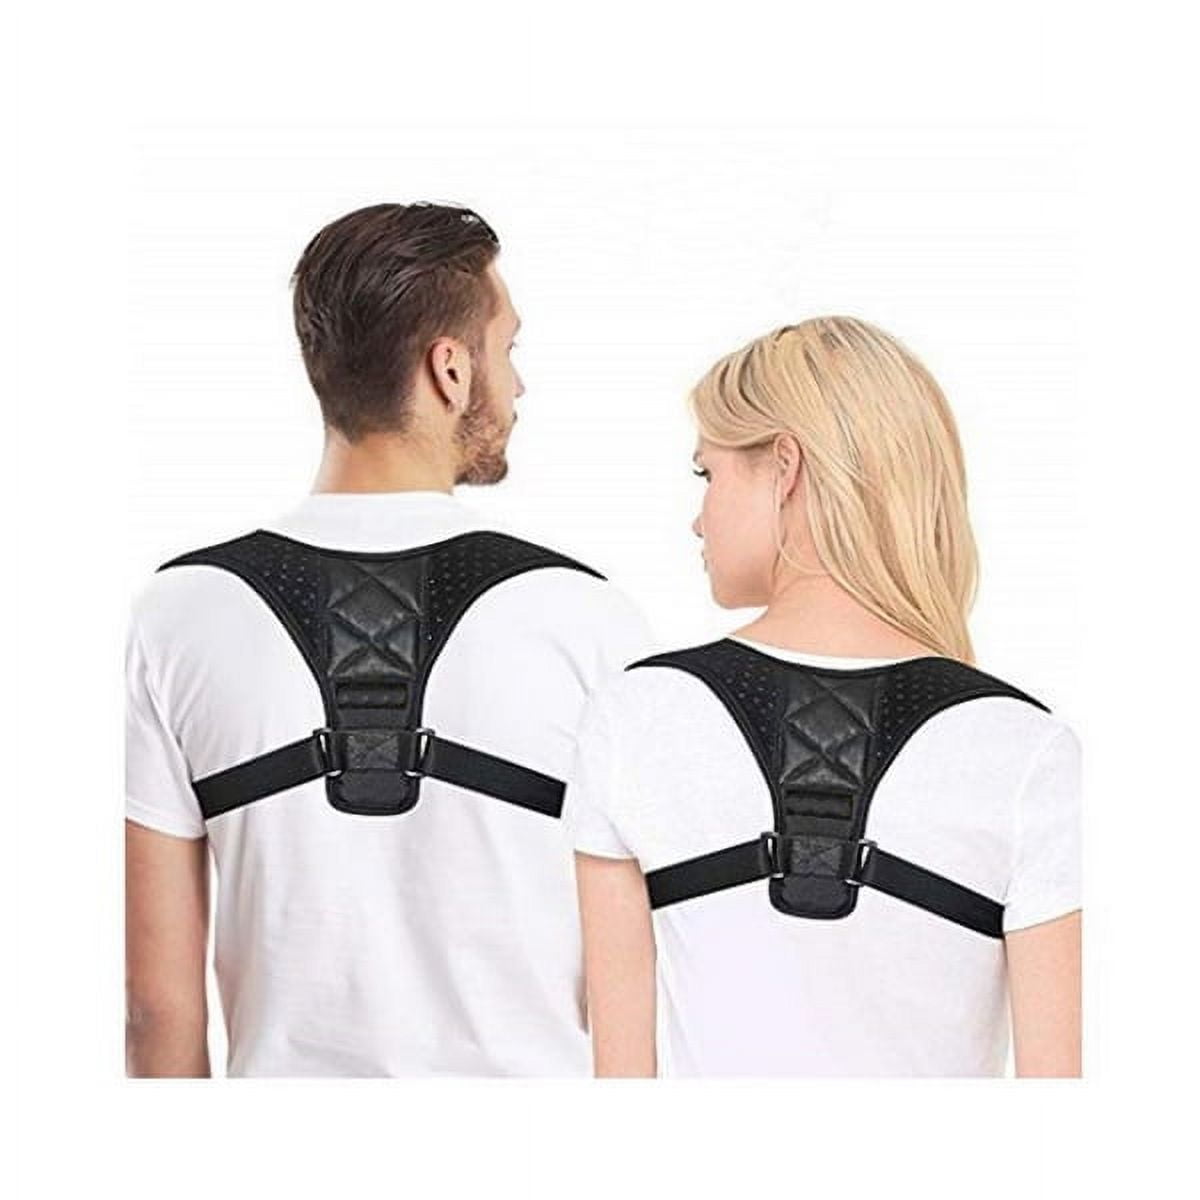 Giftscircle Posture Corrector for Men and Women, Upper Back Brace for  Clavicle Support, Adjustable Back Straightener and Providing Pain Relief  from Neck, Back & Shoulder - Regular 1 Each 